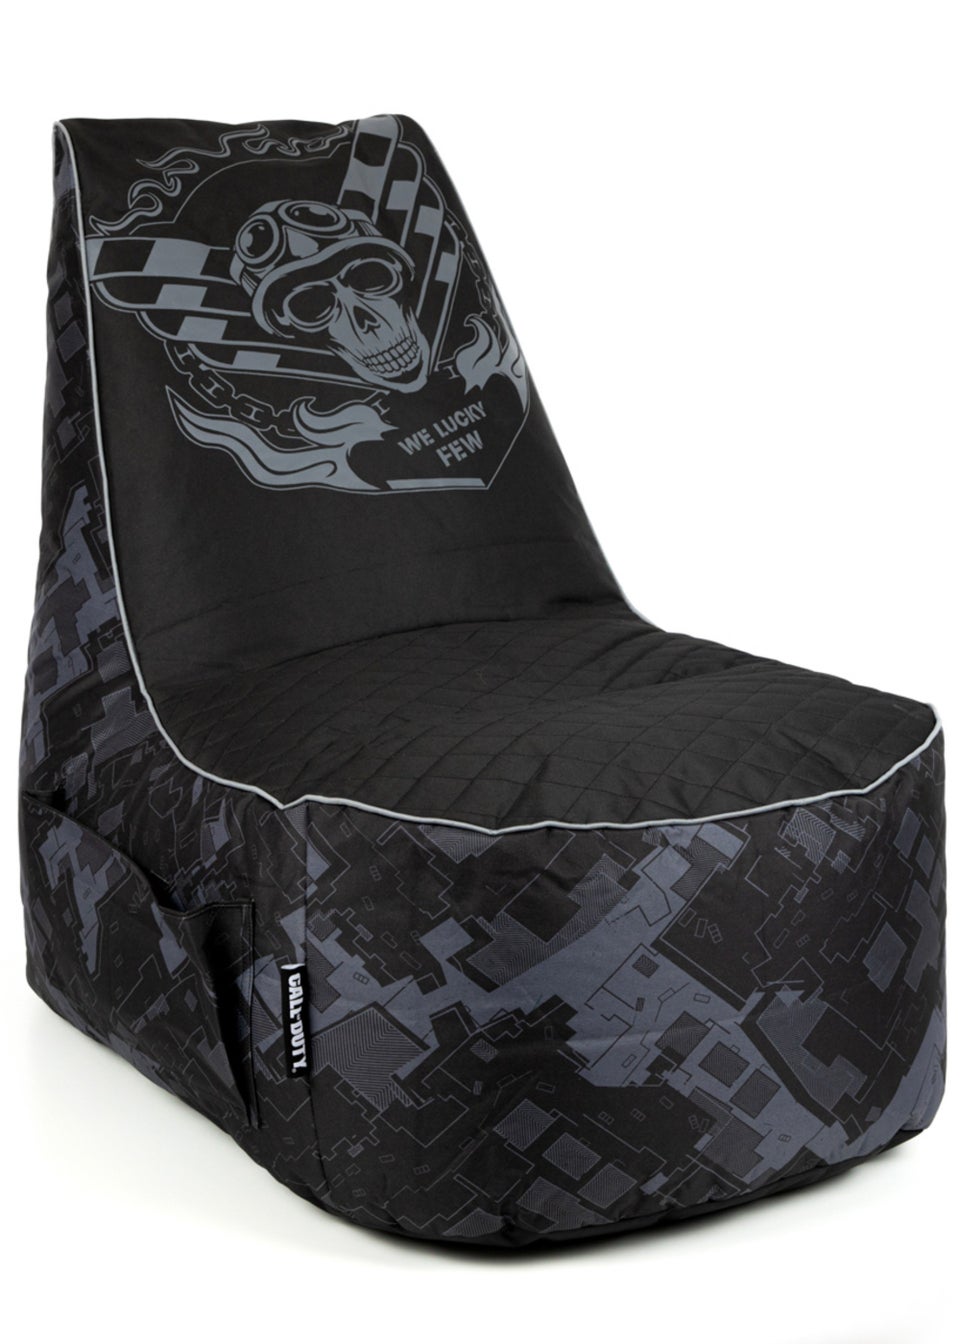 KAIKOO Call of Duty Gaming Chair